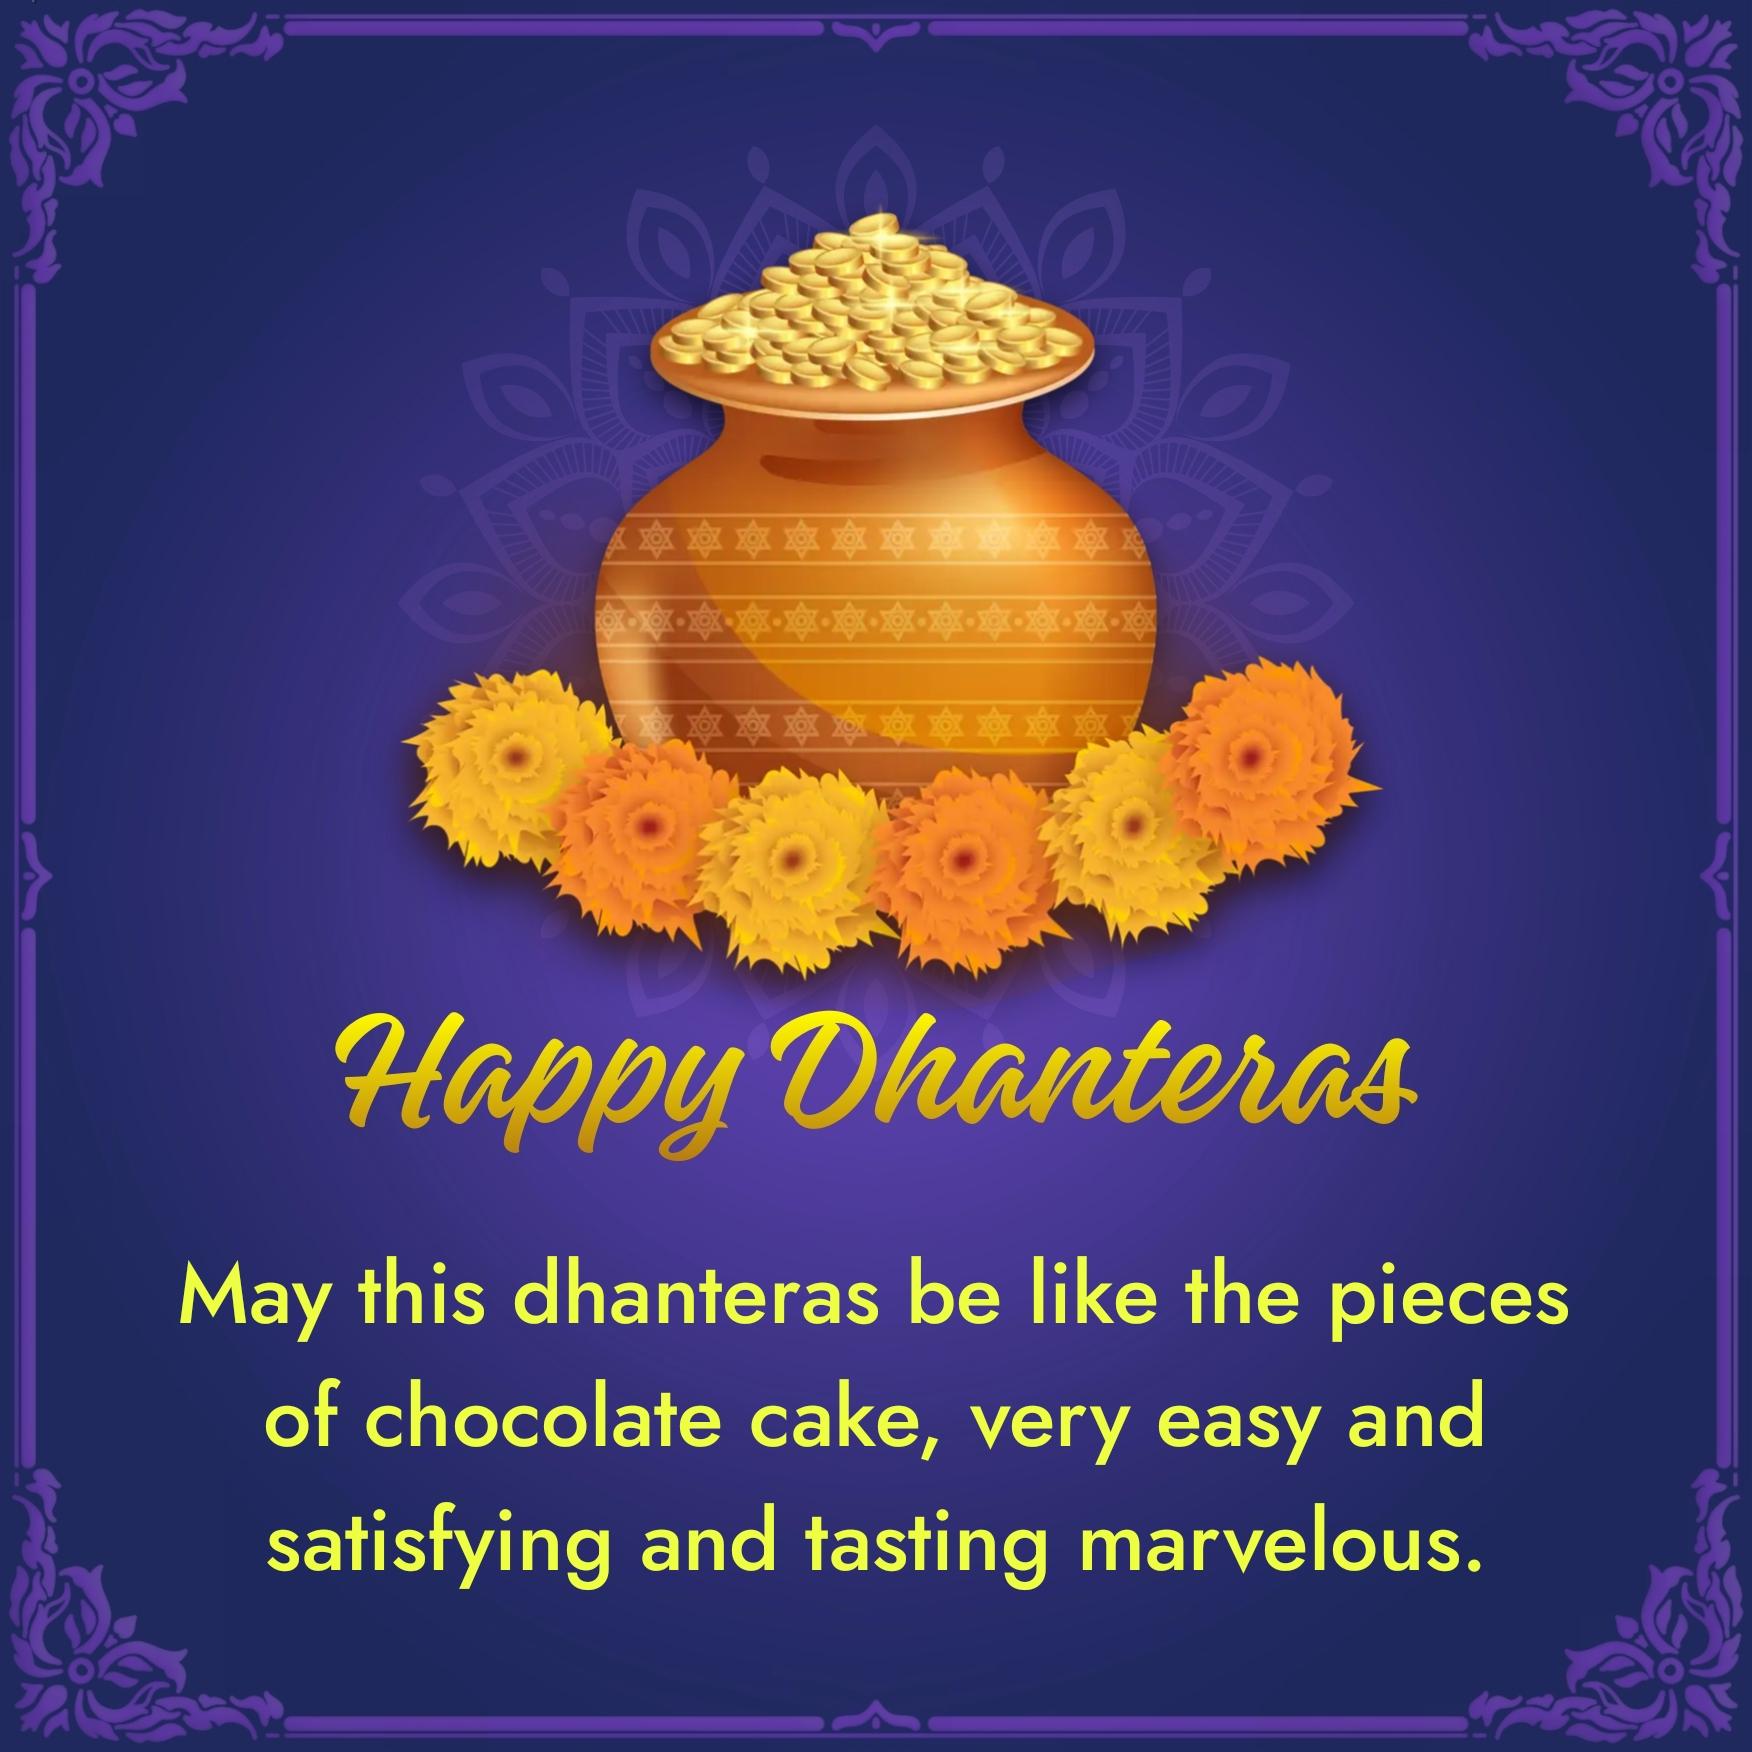 May this dhanteras be like the pieces of chocolate cake